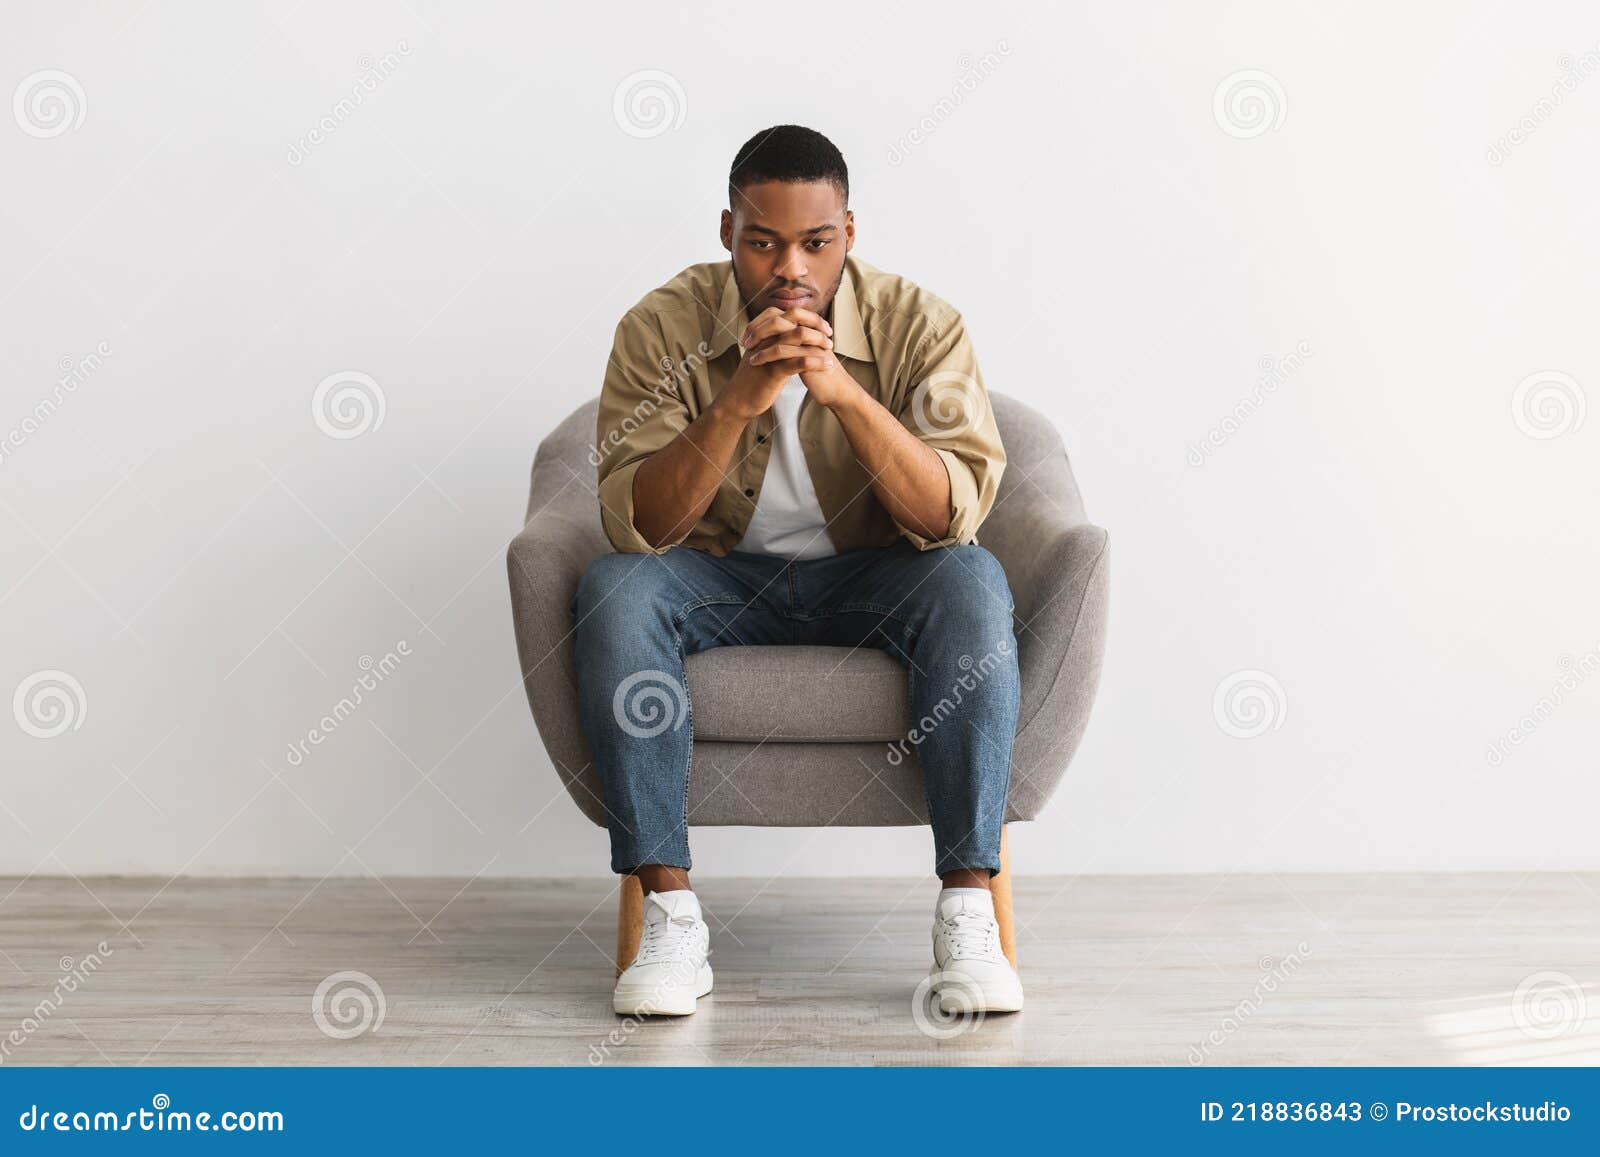 Thoughtful African Man Thinking Sitting in Chair Over Gray ...